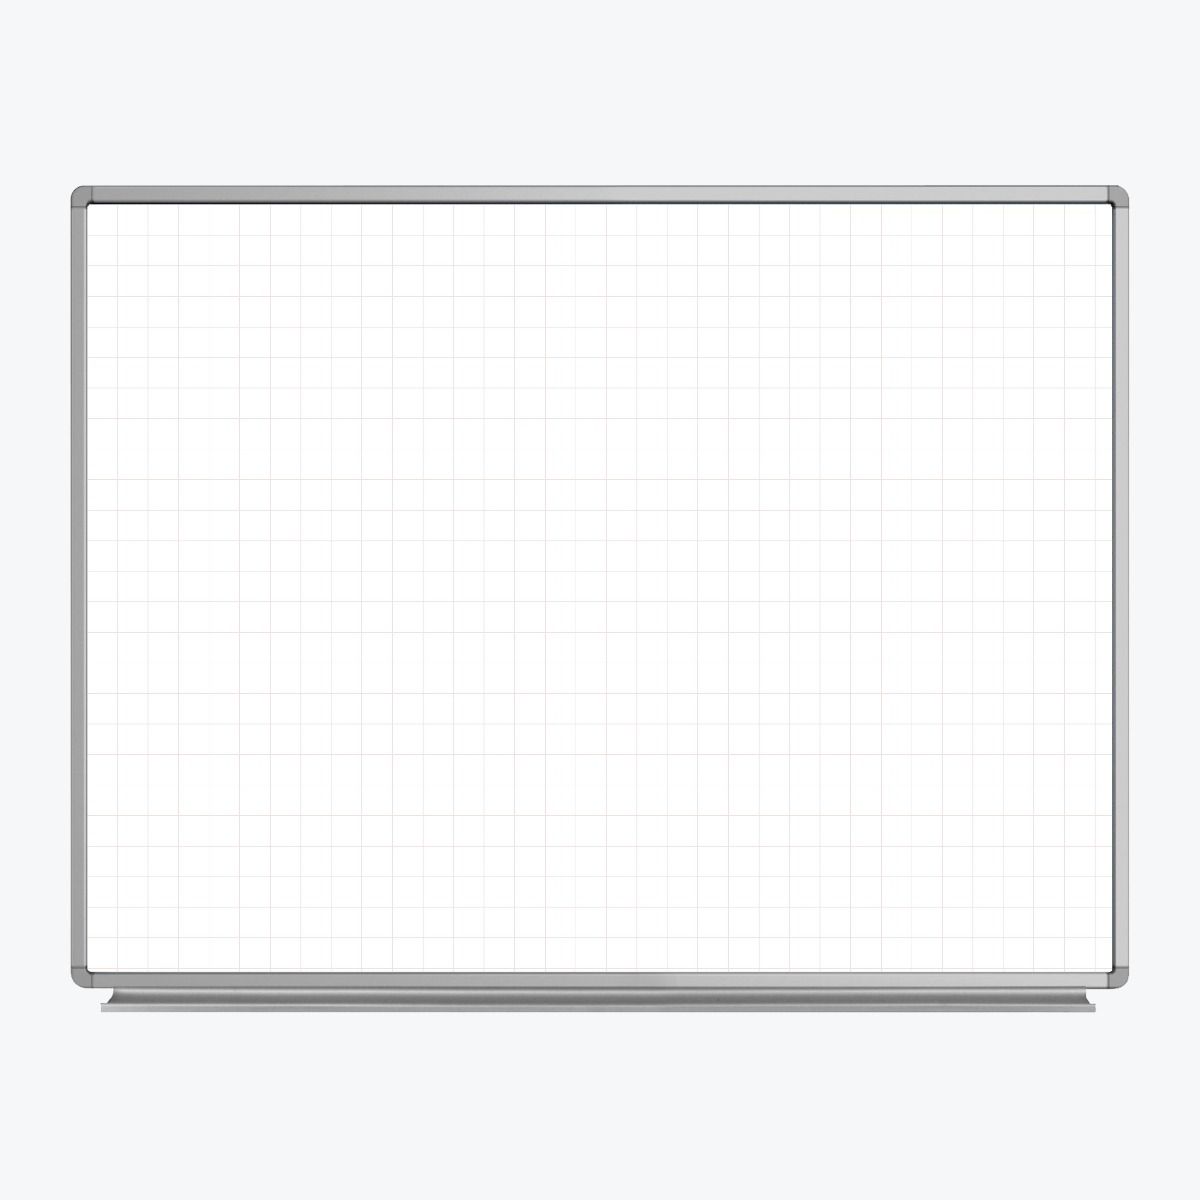 Picture of Luxor WB4836LB 48 x 36 in. Wall Mounted Magnetic Ghost Grid Whiteboard